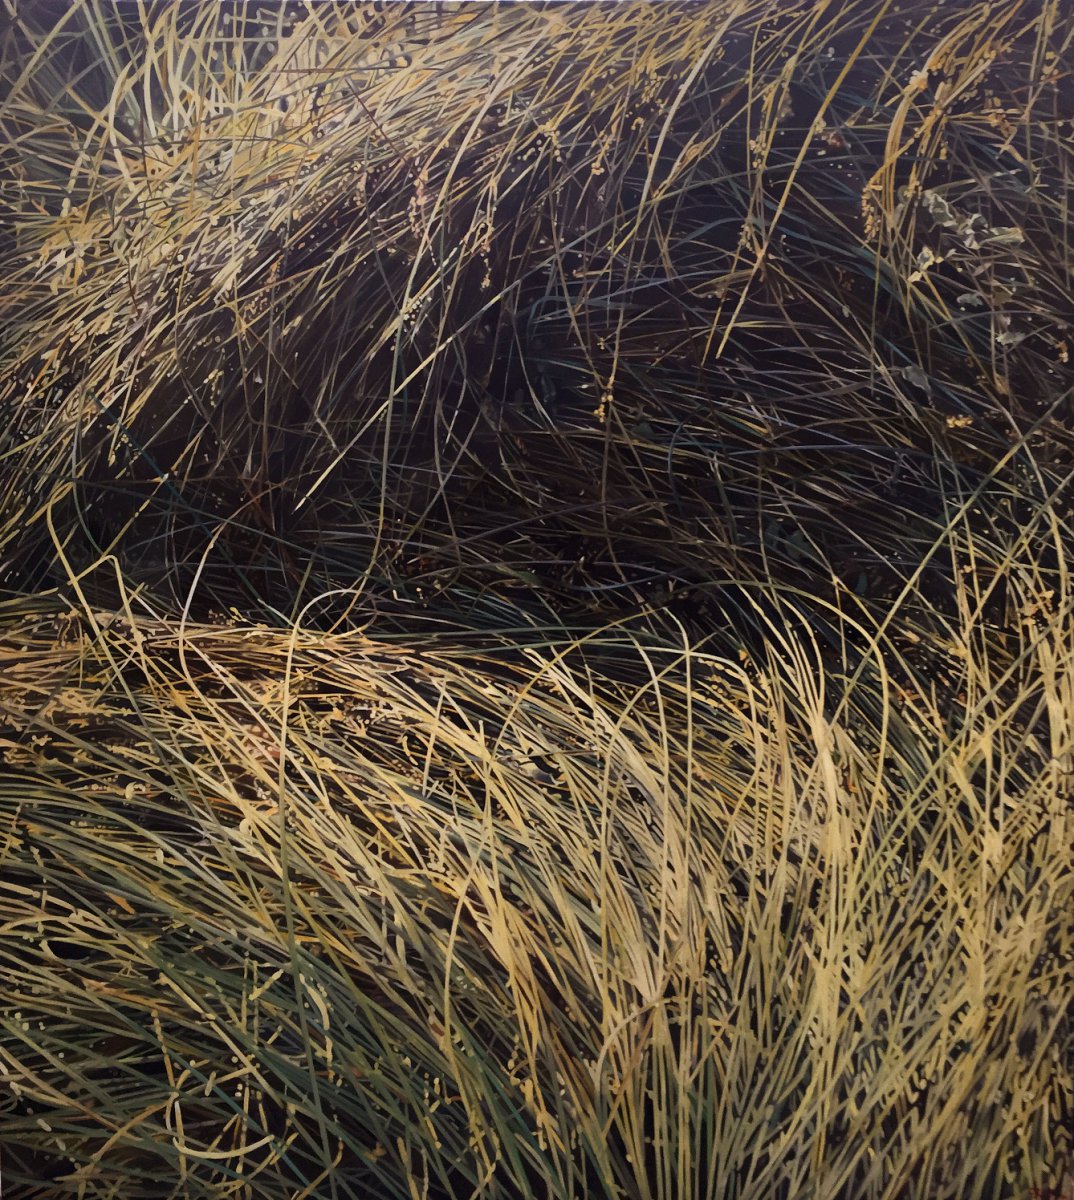 Herbes II - Jacques Bodin